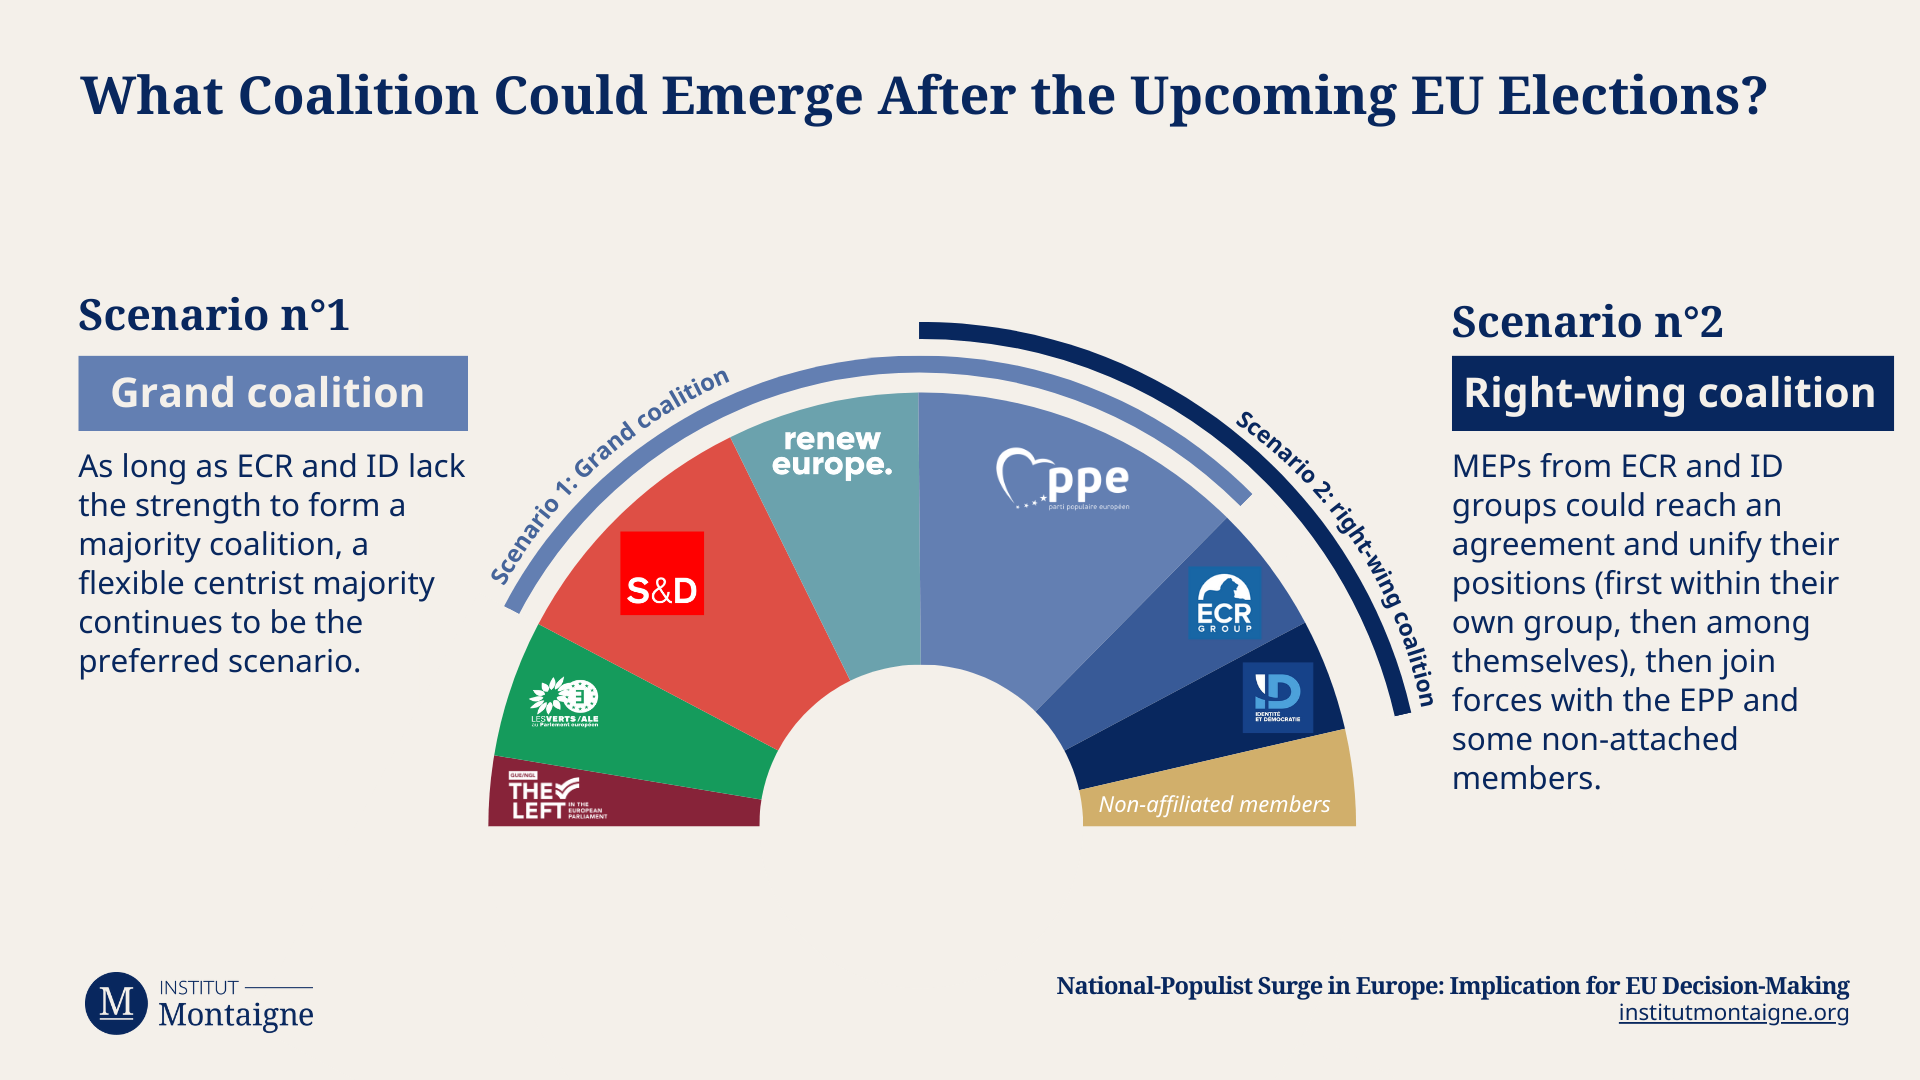 What Coalition Could Emerge After the Upcoming EU Elections?